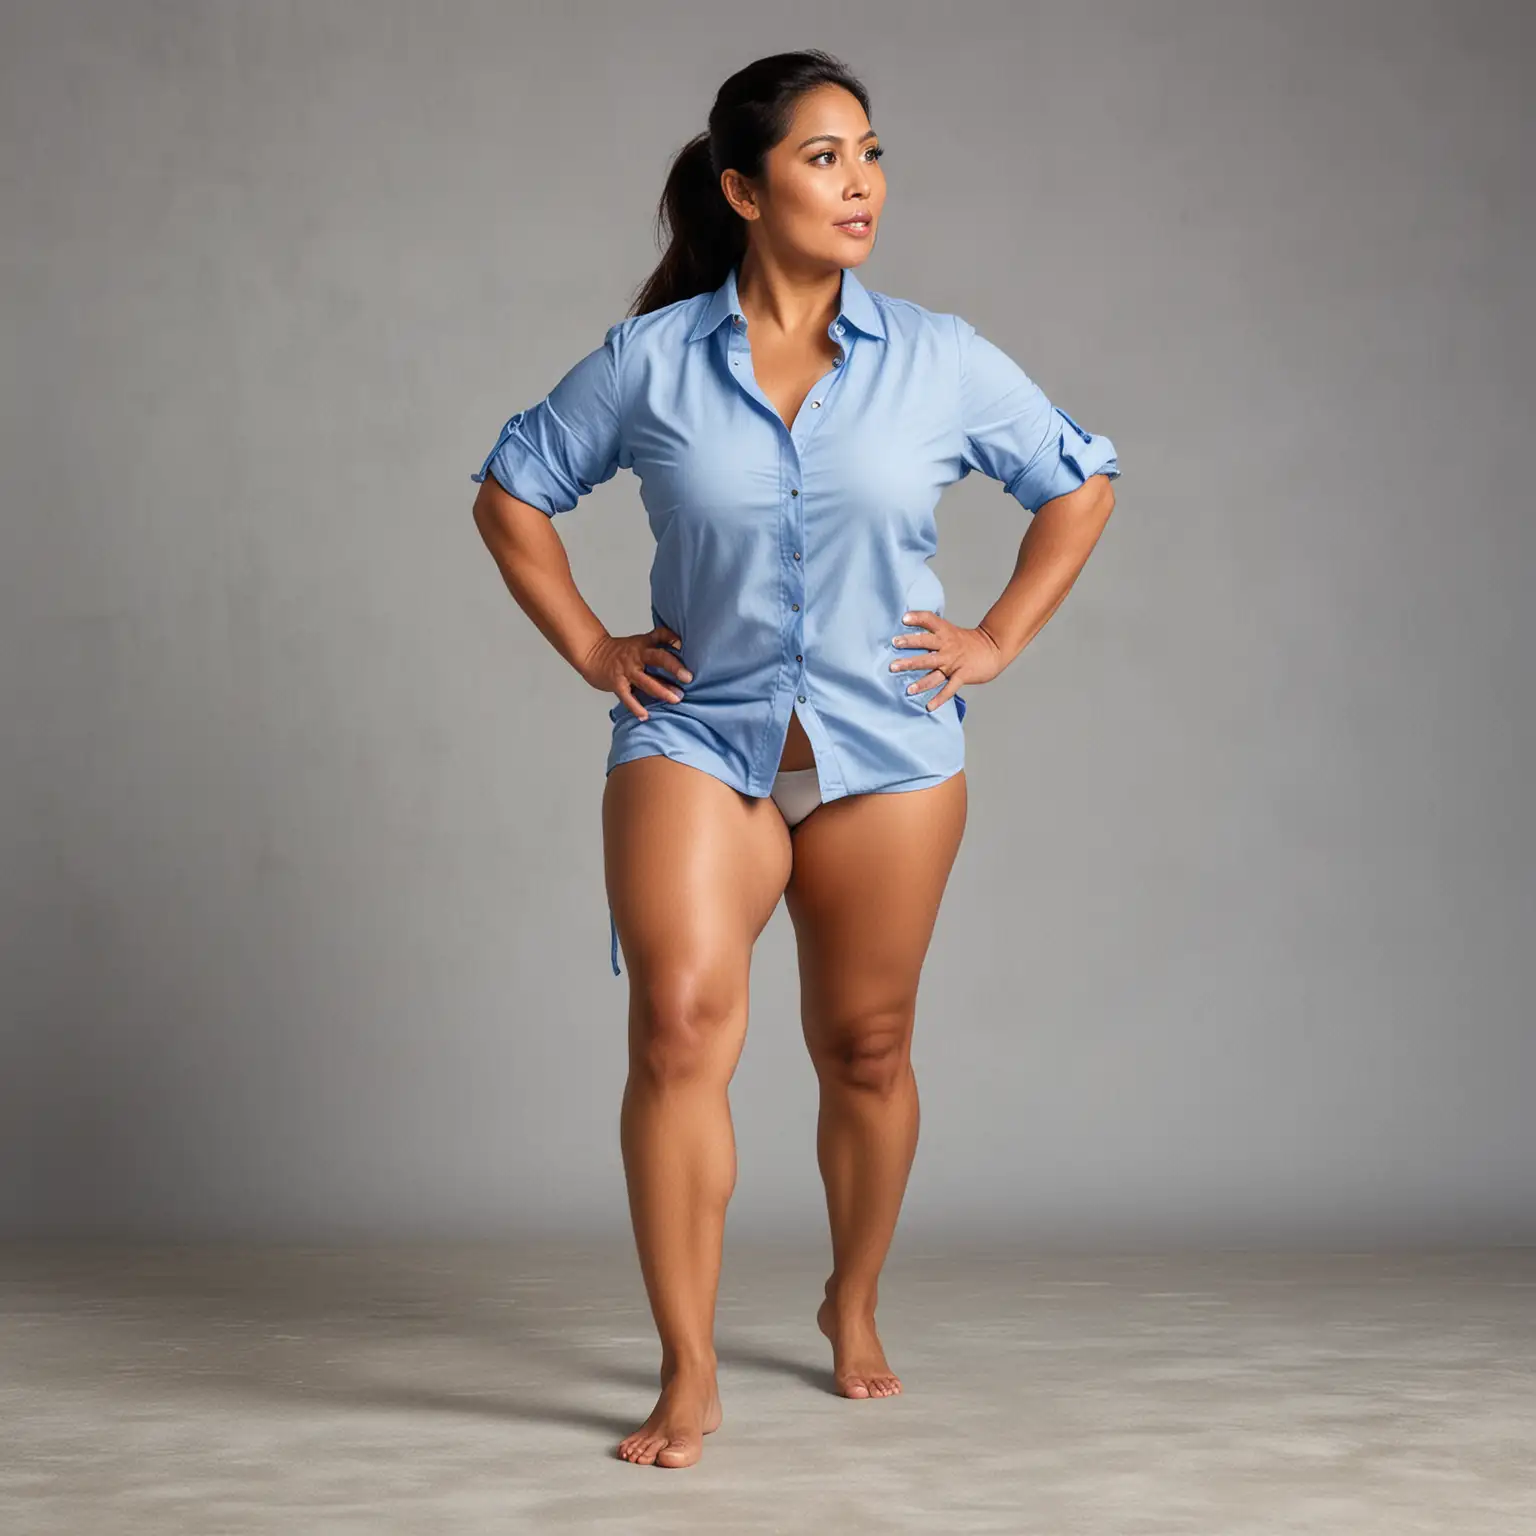 Beautiful, Mature, Curvy Filipino Woman wearing an untucked stretched light blue button down shirt, no pants or skirt, no shoes, hands to hips,  shown performing squats down.